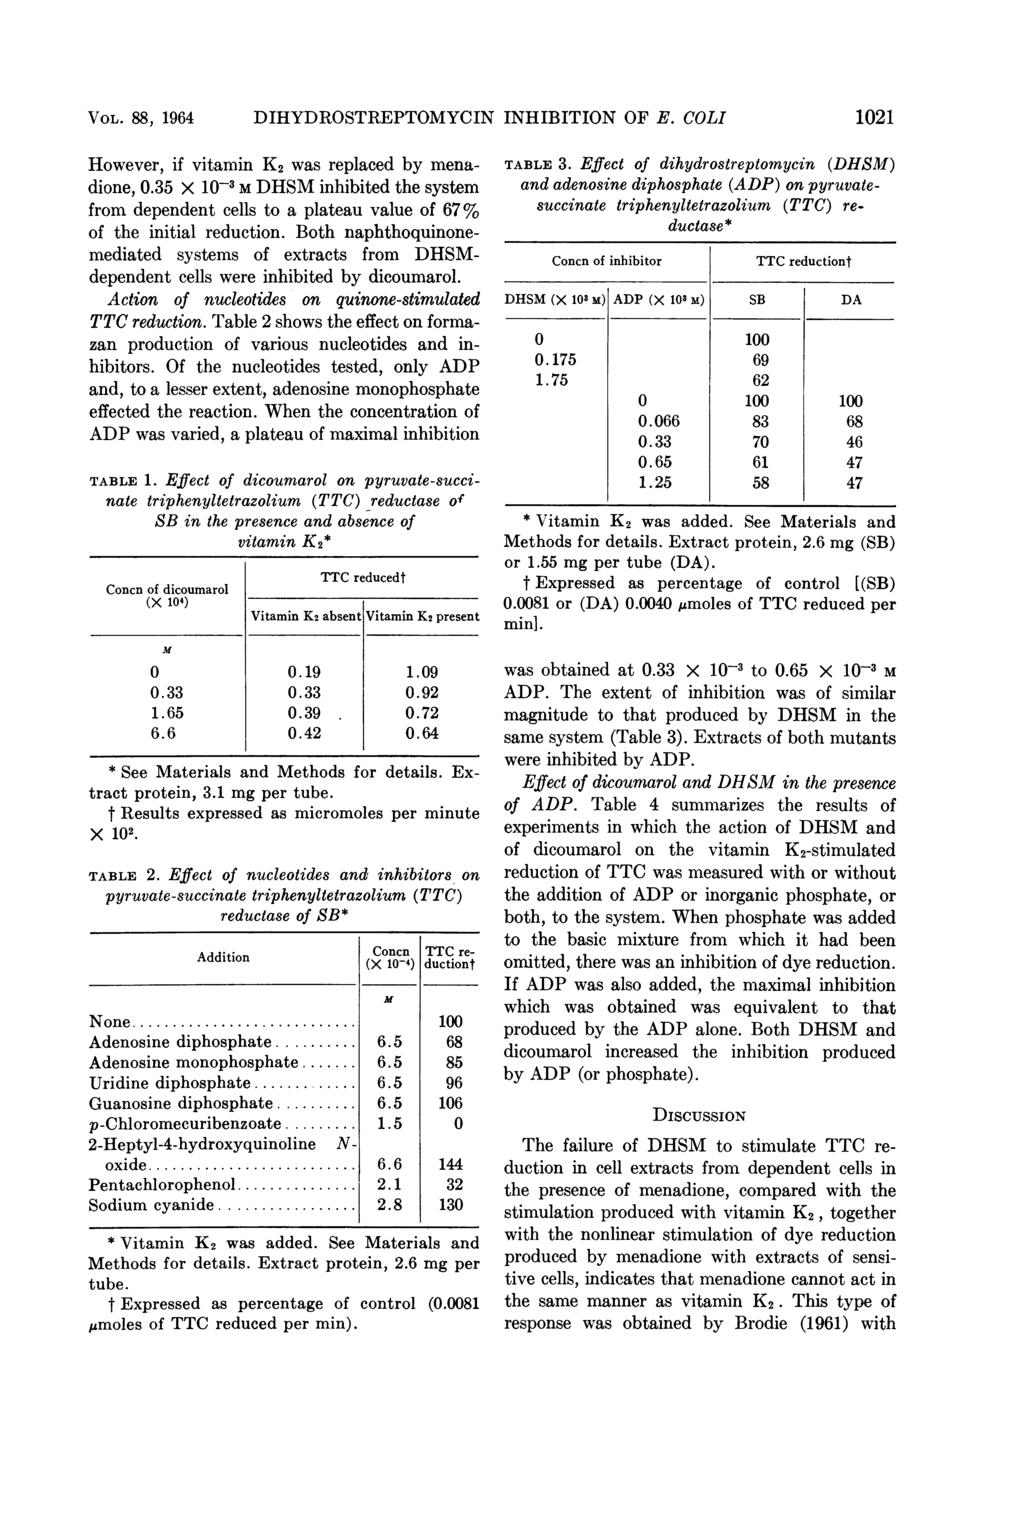 VOL. 88, 1964 DIHYDROSTREPTOMYCIN INHIBITION OF E. COLI 1021 However, if vitamin K2 was replaced by menadione, 0.